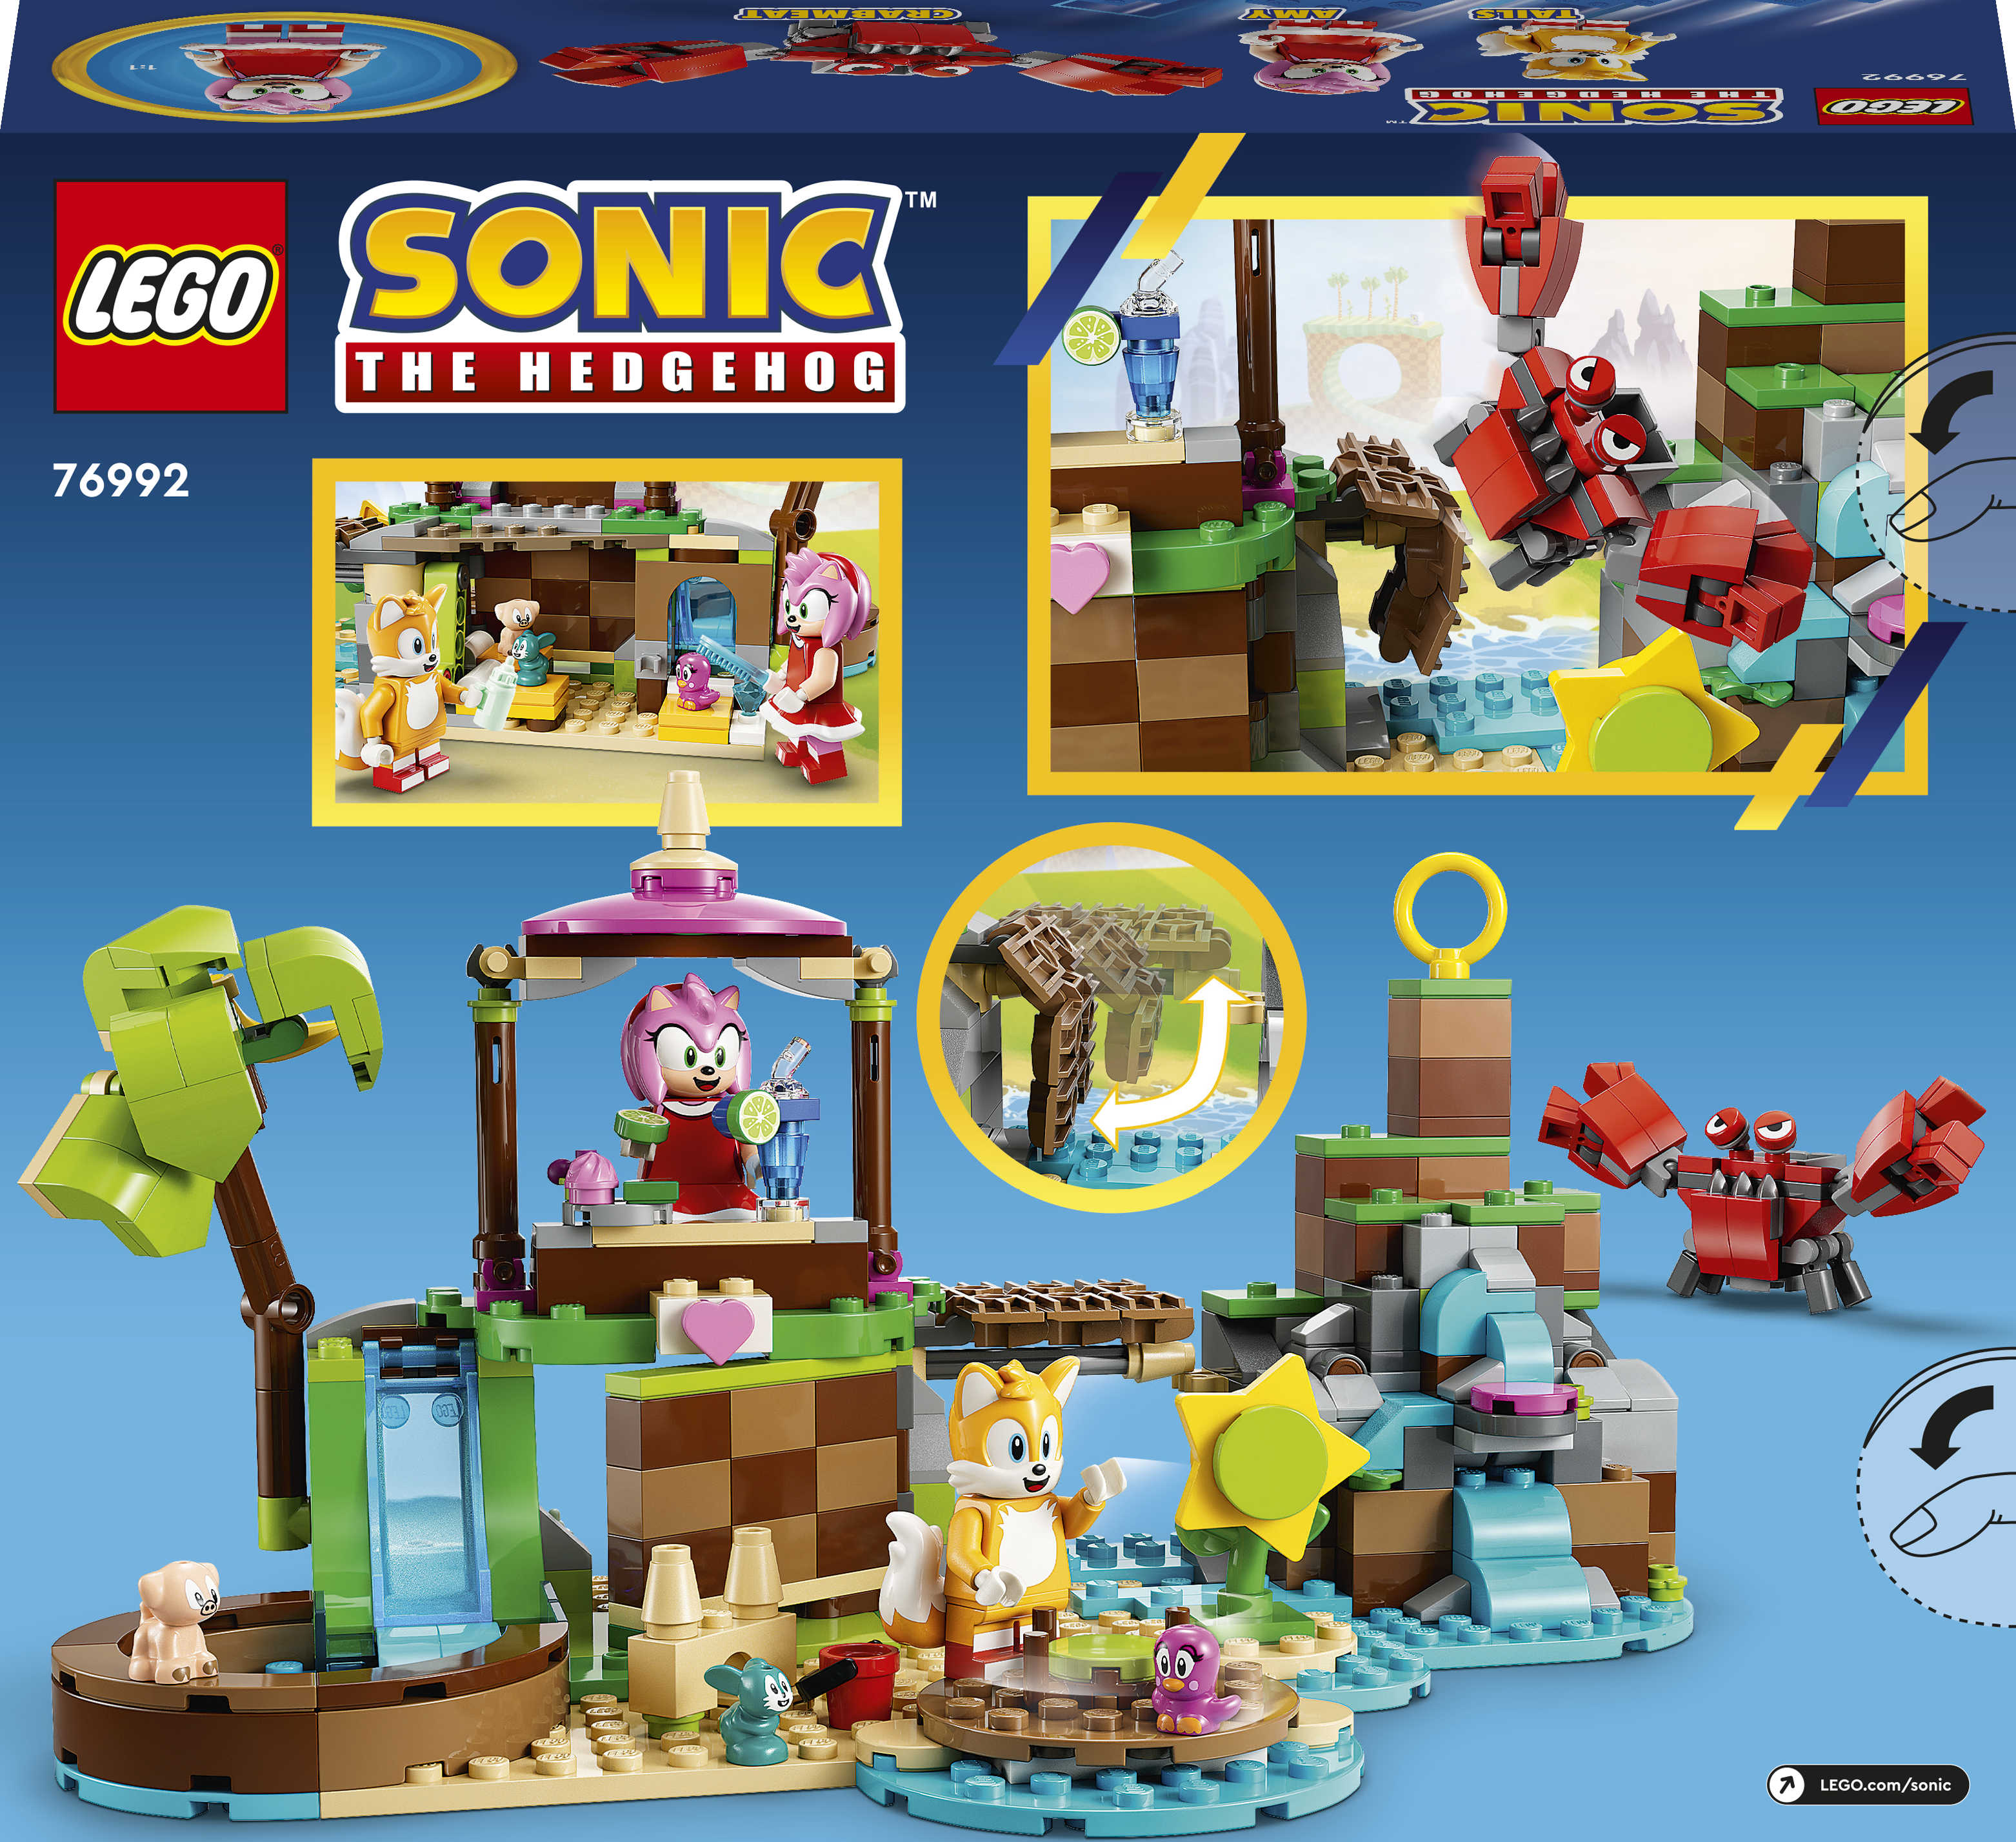 Four New Sonic The Hedgehog LEGO Sets Are Coming In August